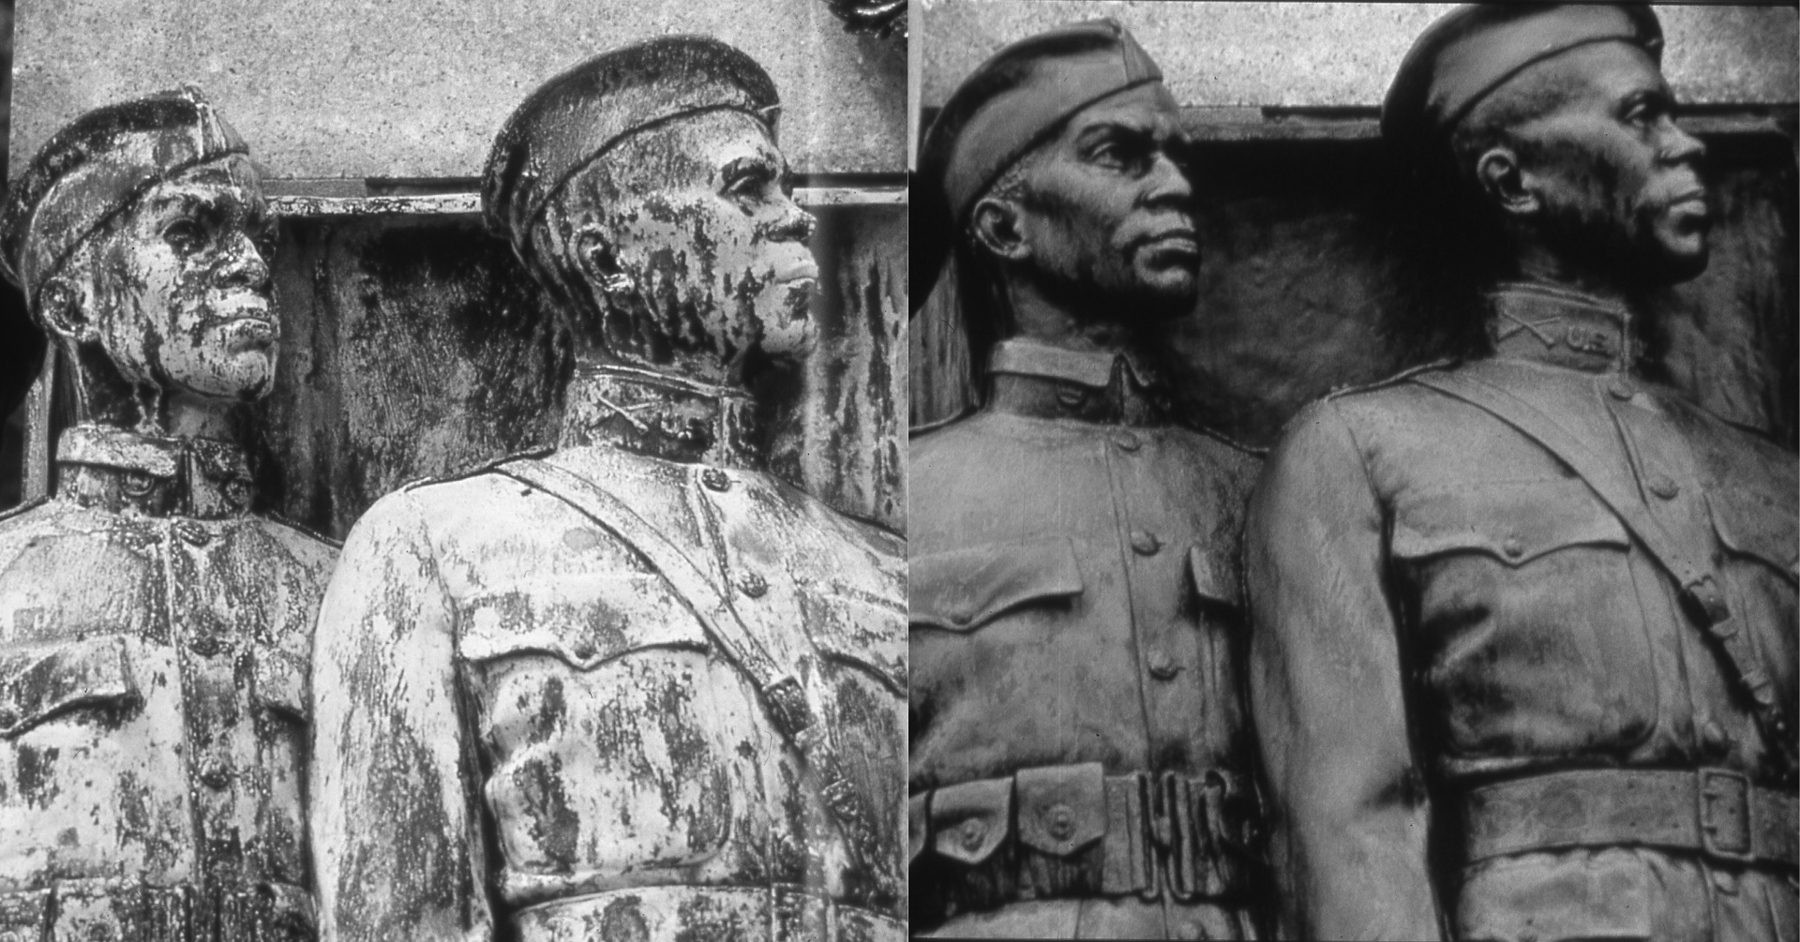 Before and after conservation of the memorial - black and white photo